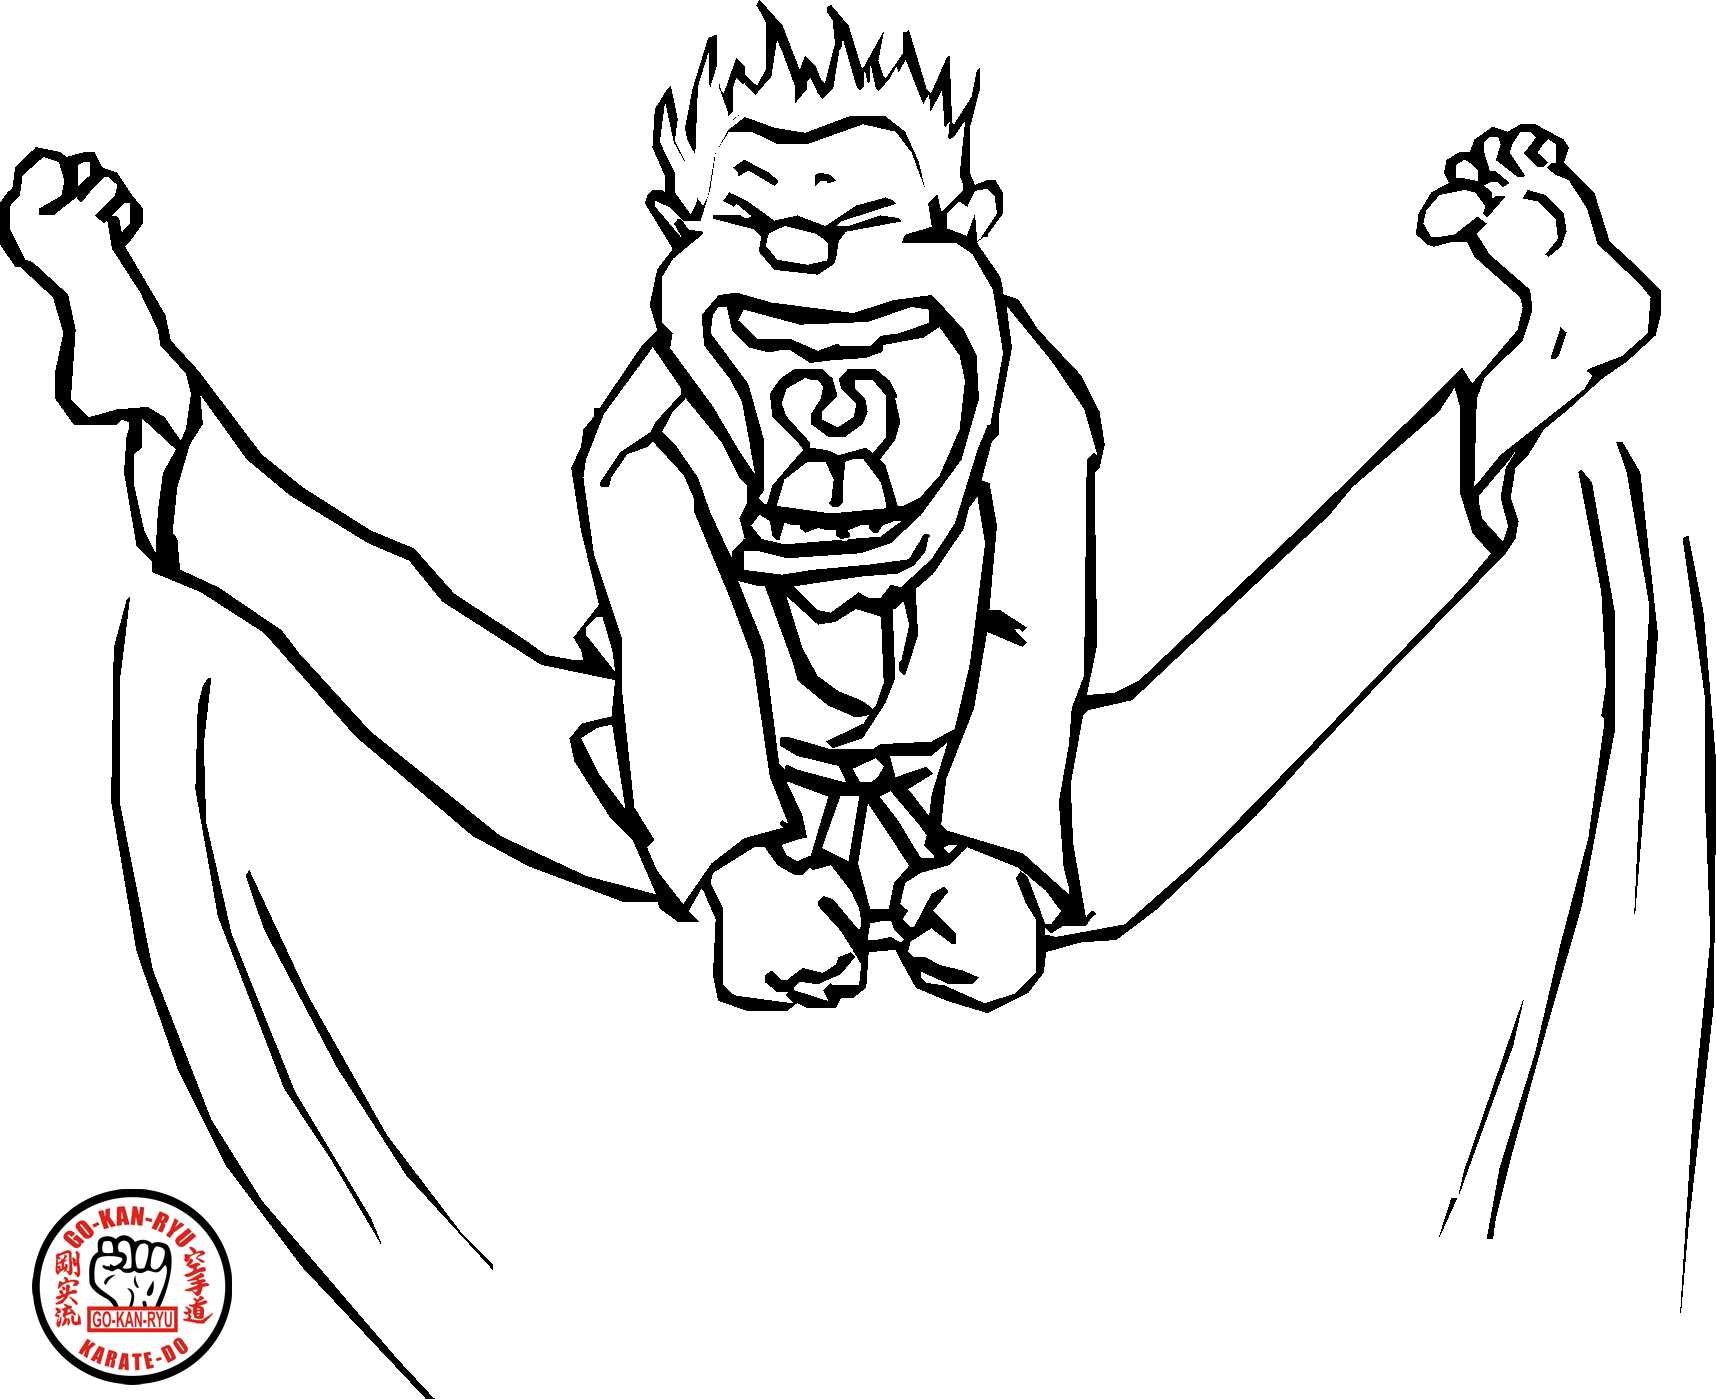 Free coloring pages of karate